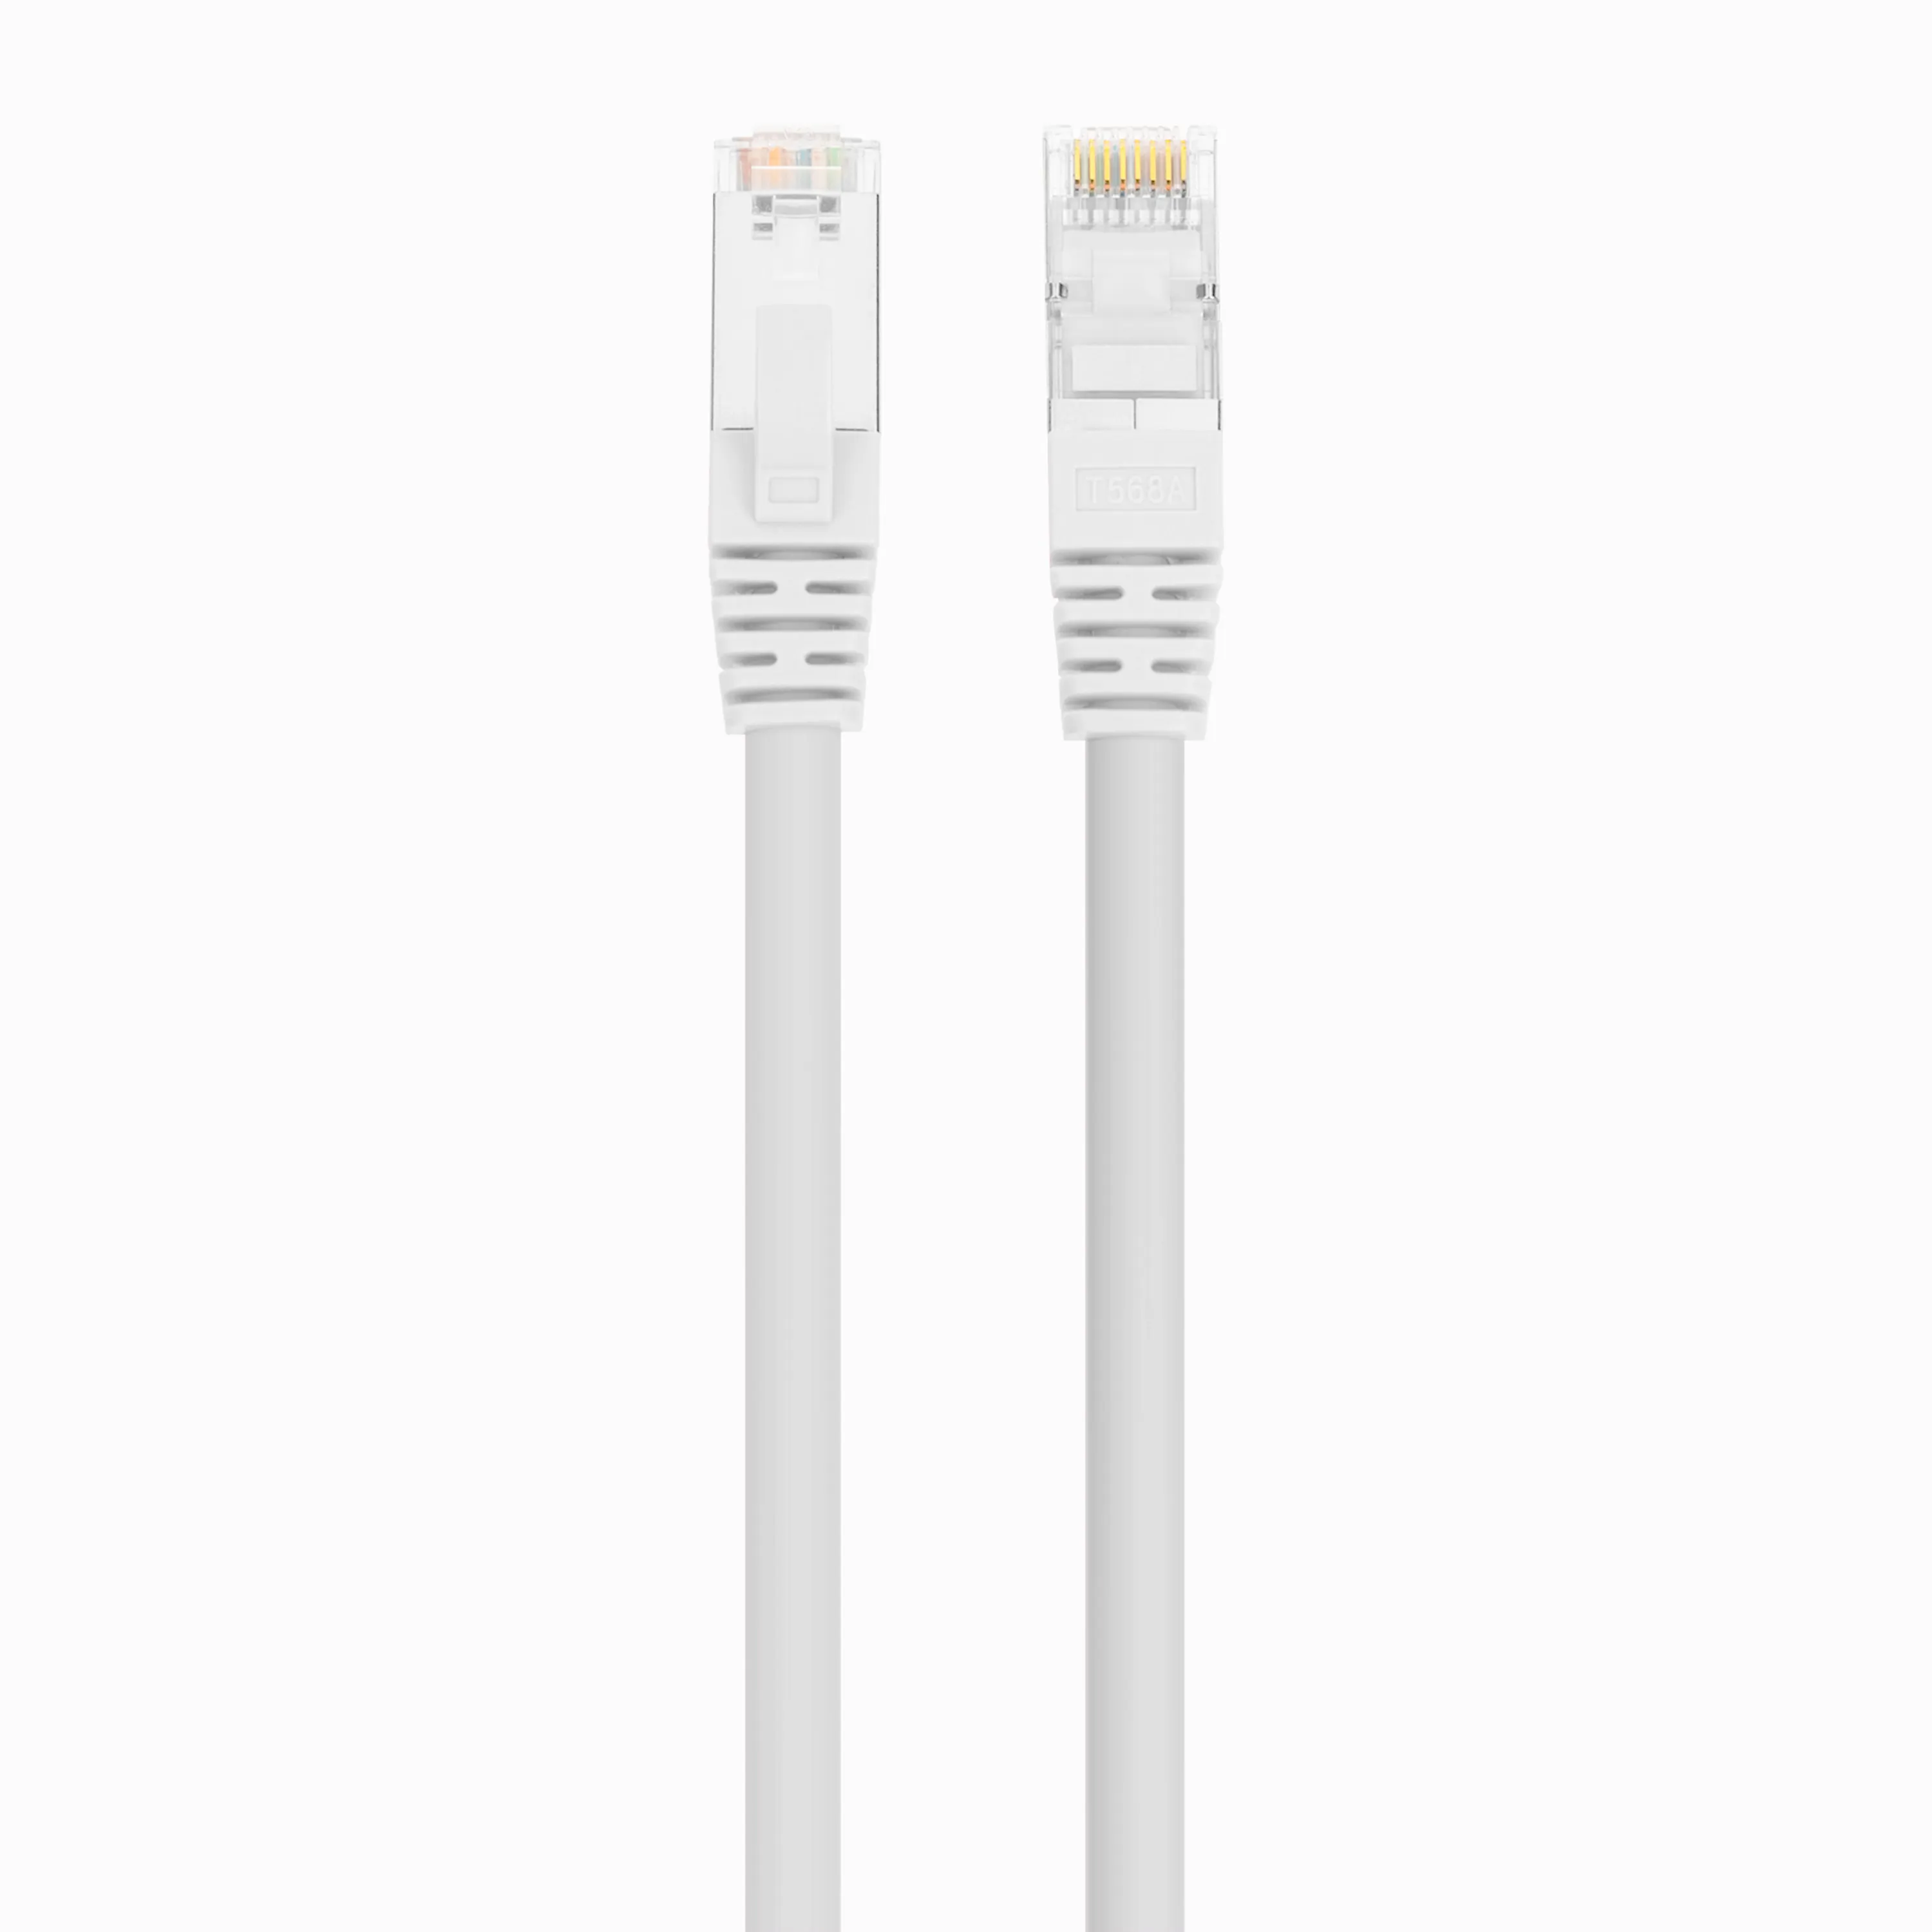 Customized ethernet cat8 lan cable network rj45 jumper 40gb 2000mhz cat8 ethernet cable 1m 5M 10M 30m Rj45 CAT8 40Gbps 2000MHz